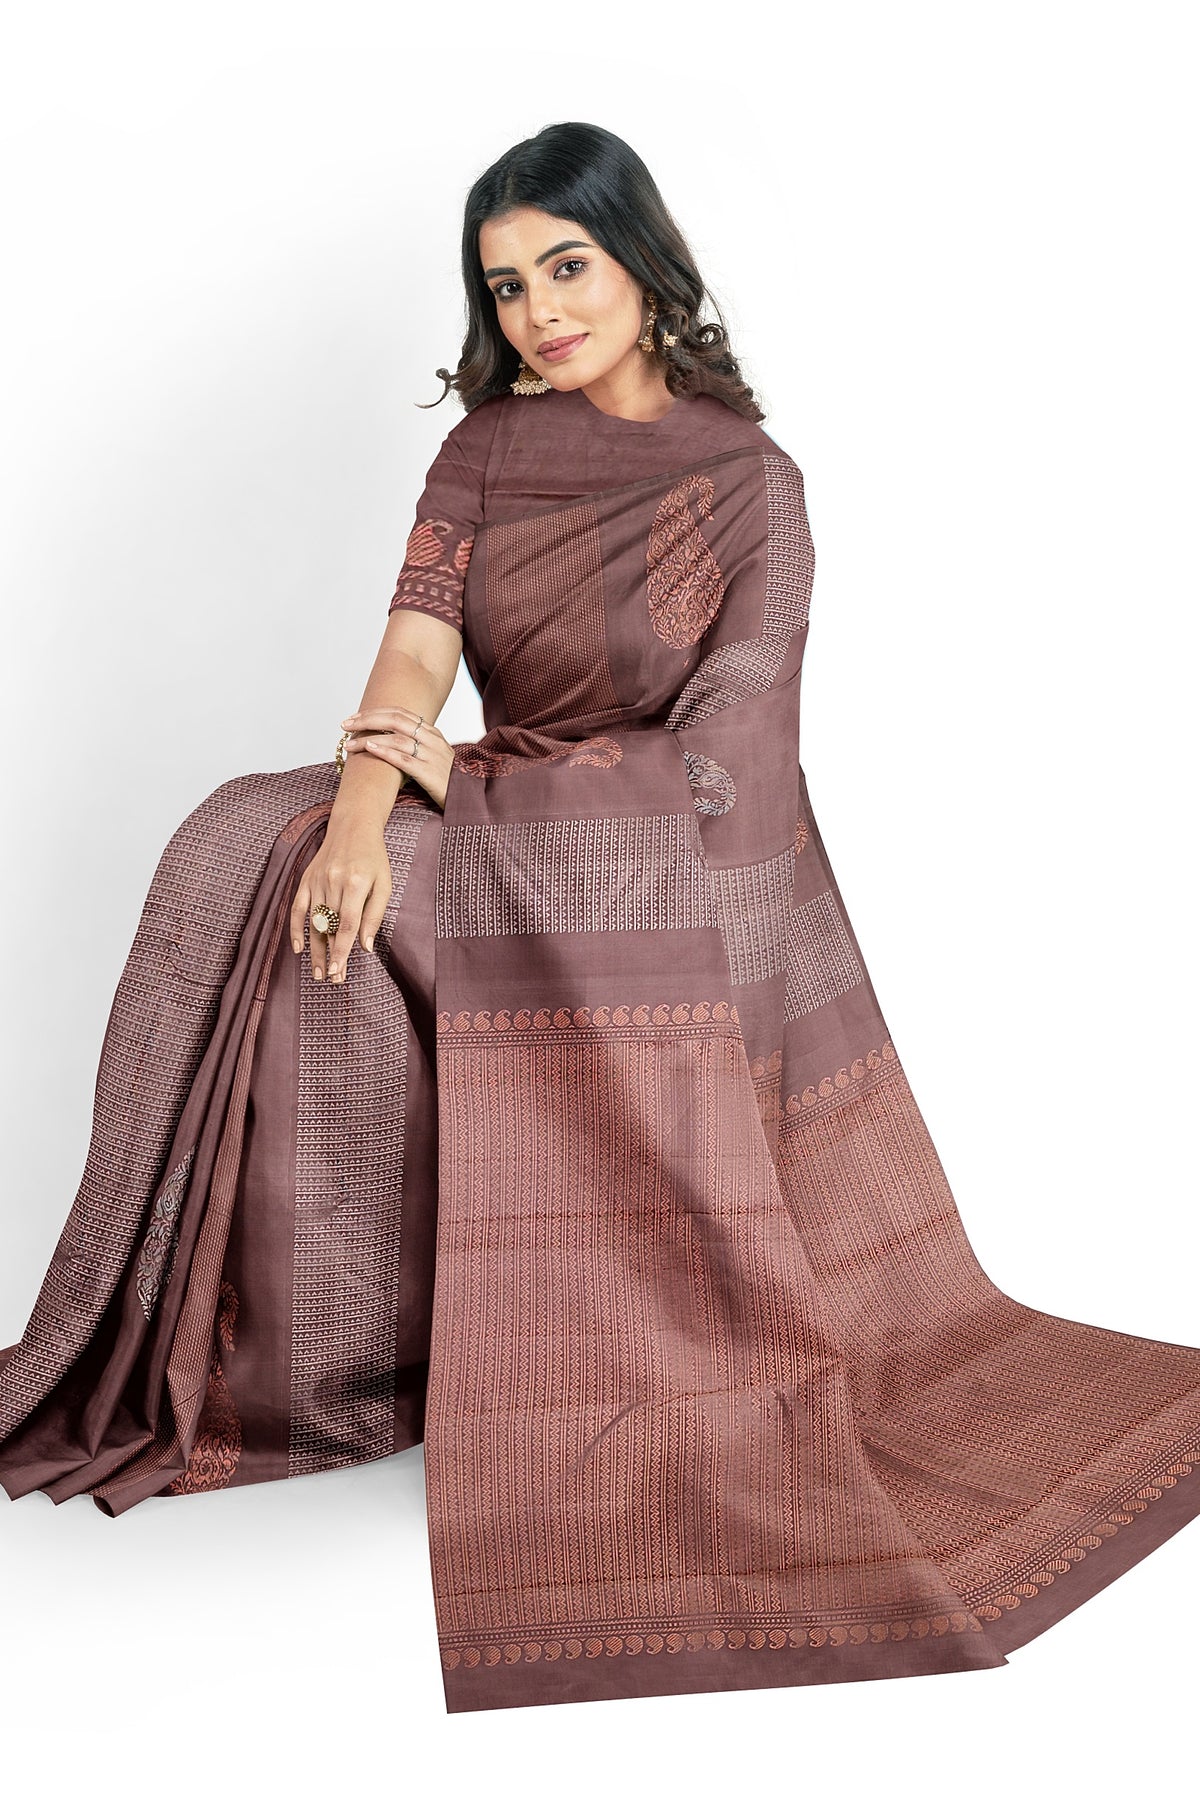 A model draped in  a unique and rich brown soft silk handloom saree with brown body and  pallu. The saree is designed with paisley & geometrical motifs in silver & copper zari works. The saree comes with an attached running blouse.